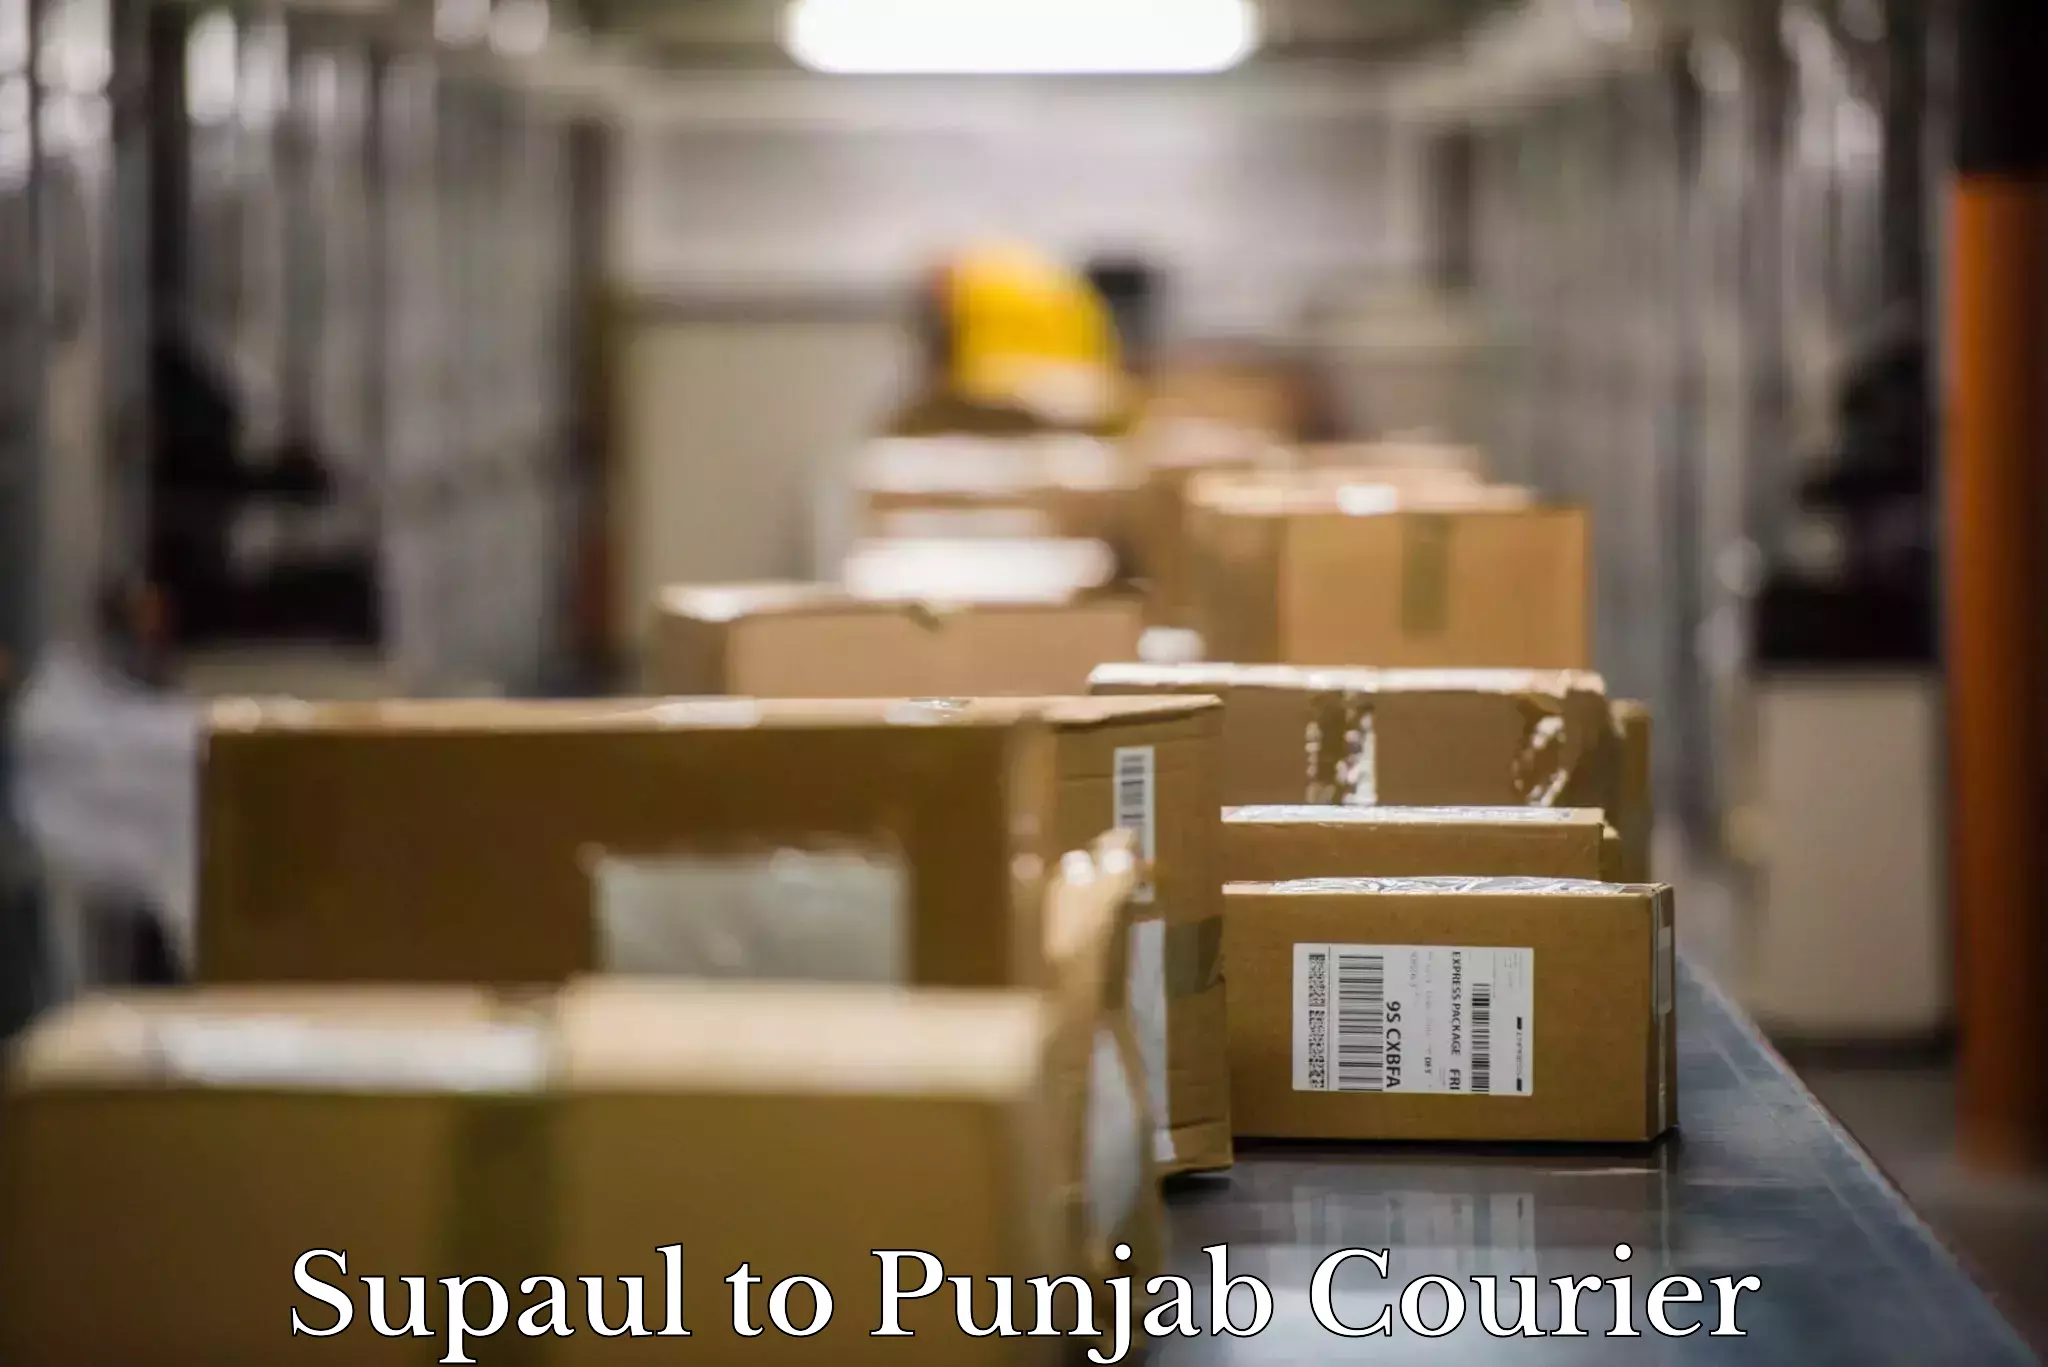 Affordable household movers in Supaul to Punjab